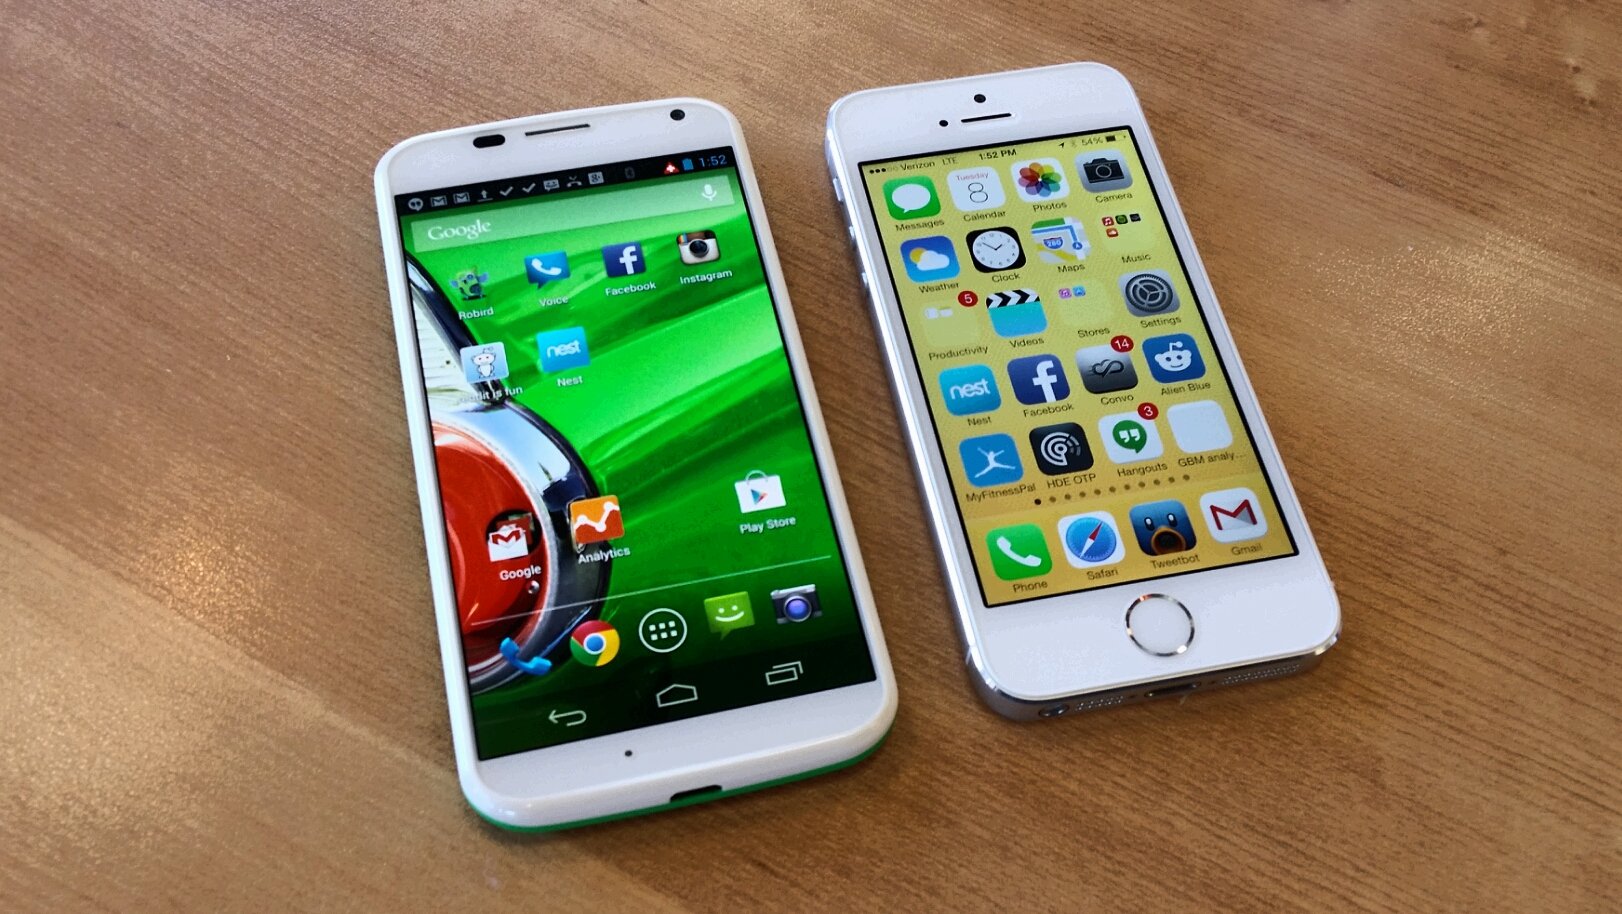 The original Moto X and iPhone 5s compared well, and Moto could deliver another tough choice.